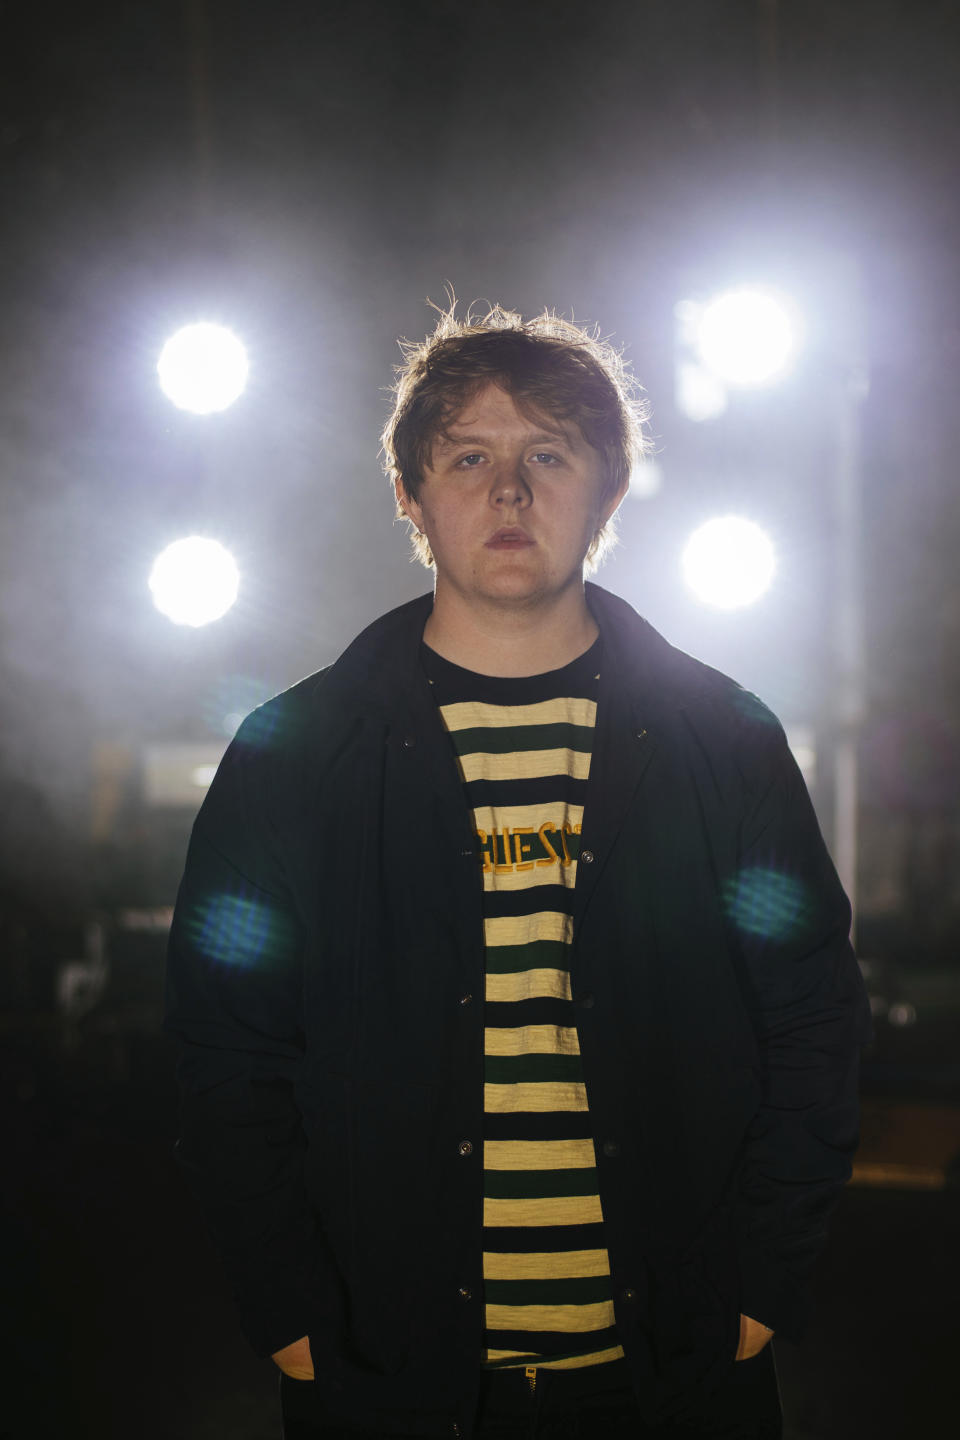 This Oct. 11, 2019 photo shows Scottish singer Lewis Capaldi poses for a portrait at concert venue Brooklyn Steel in New York. Capaldi’s hit single, “Someone You Loved,” spent seven weeks at No. 1 in the U.K. and, so far, has peaked at No. 3 on Billboard’s Hot 100 chart in the U.S. (AP Photo/Kevin Hagen)